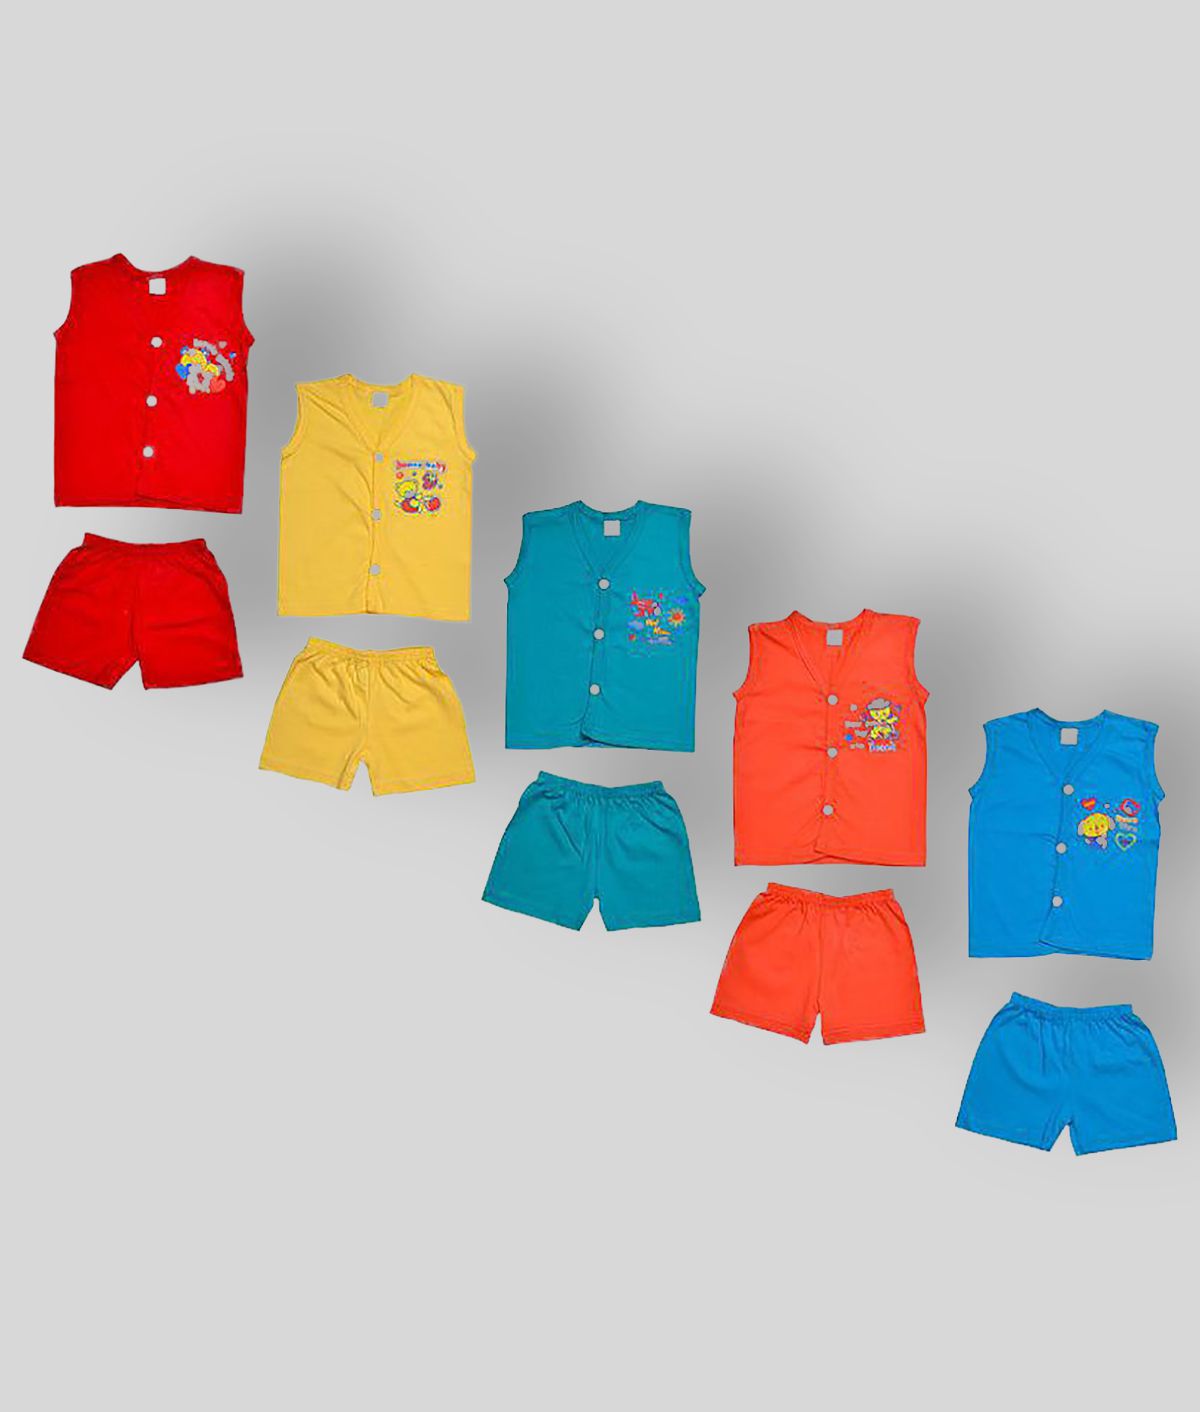     			Sathiyas - Multicolor Cotton T-Shirt & Shorts For Baby Boy ( Pack of 5 )